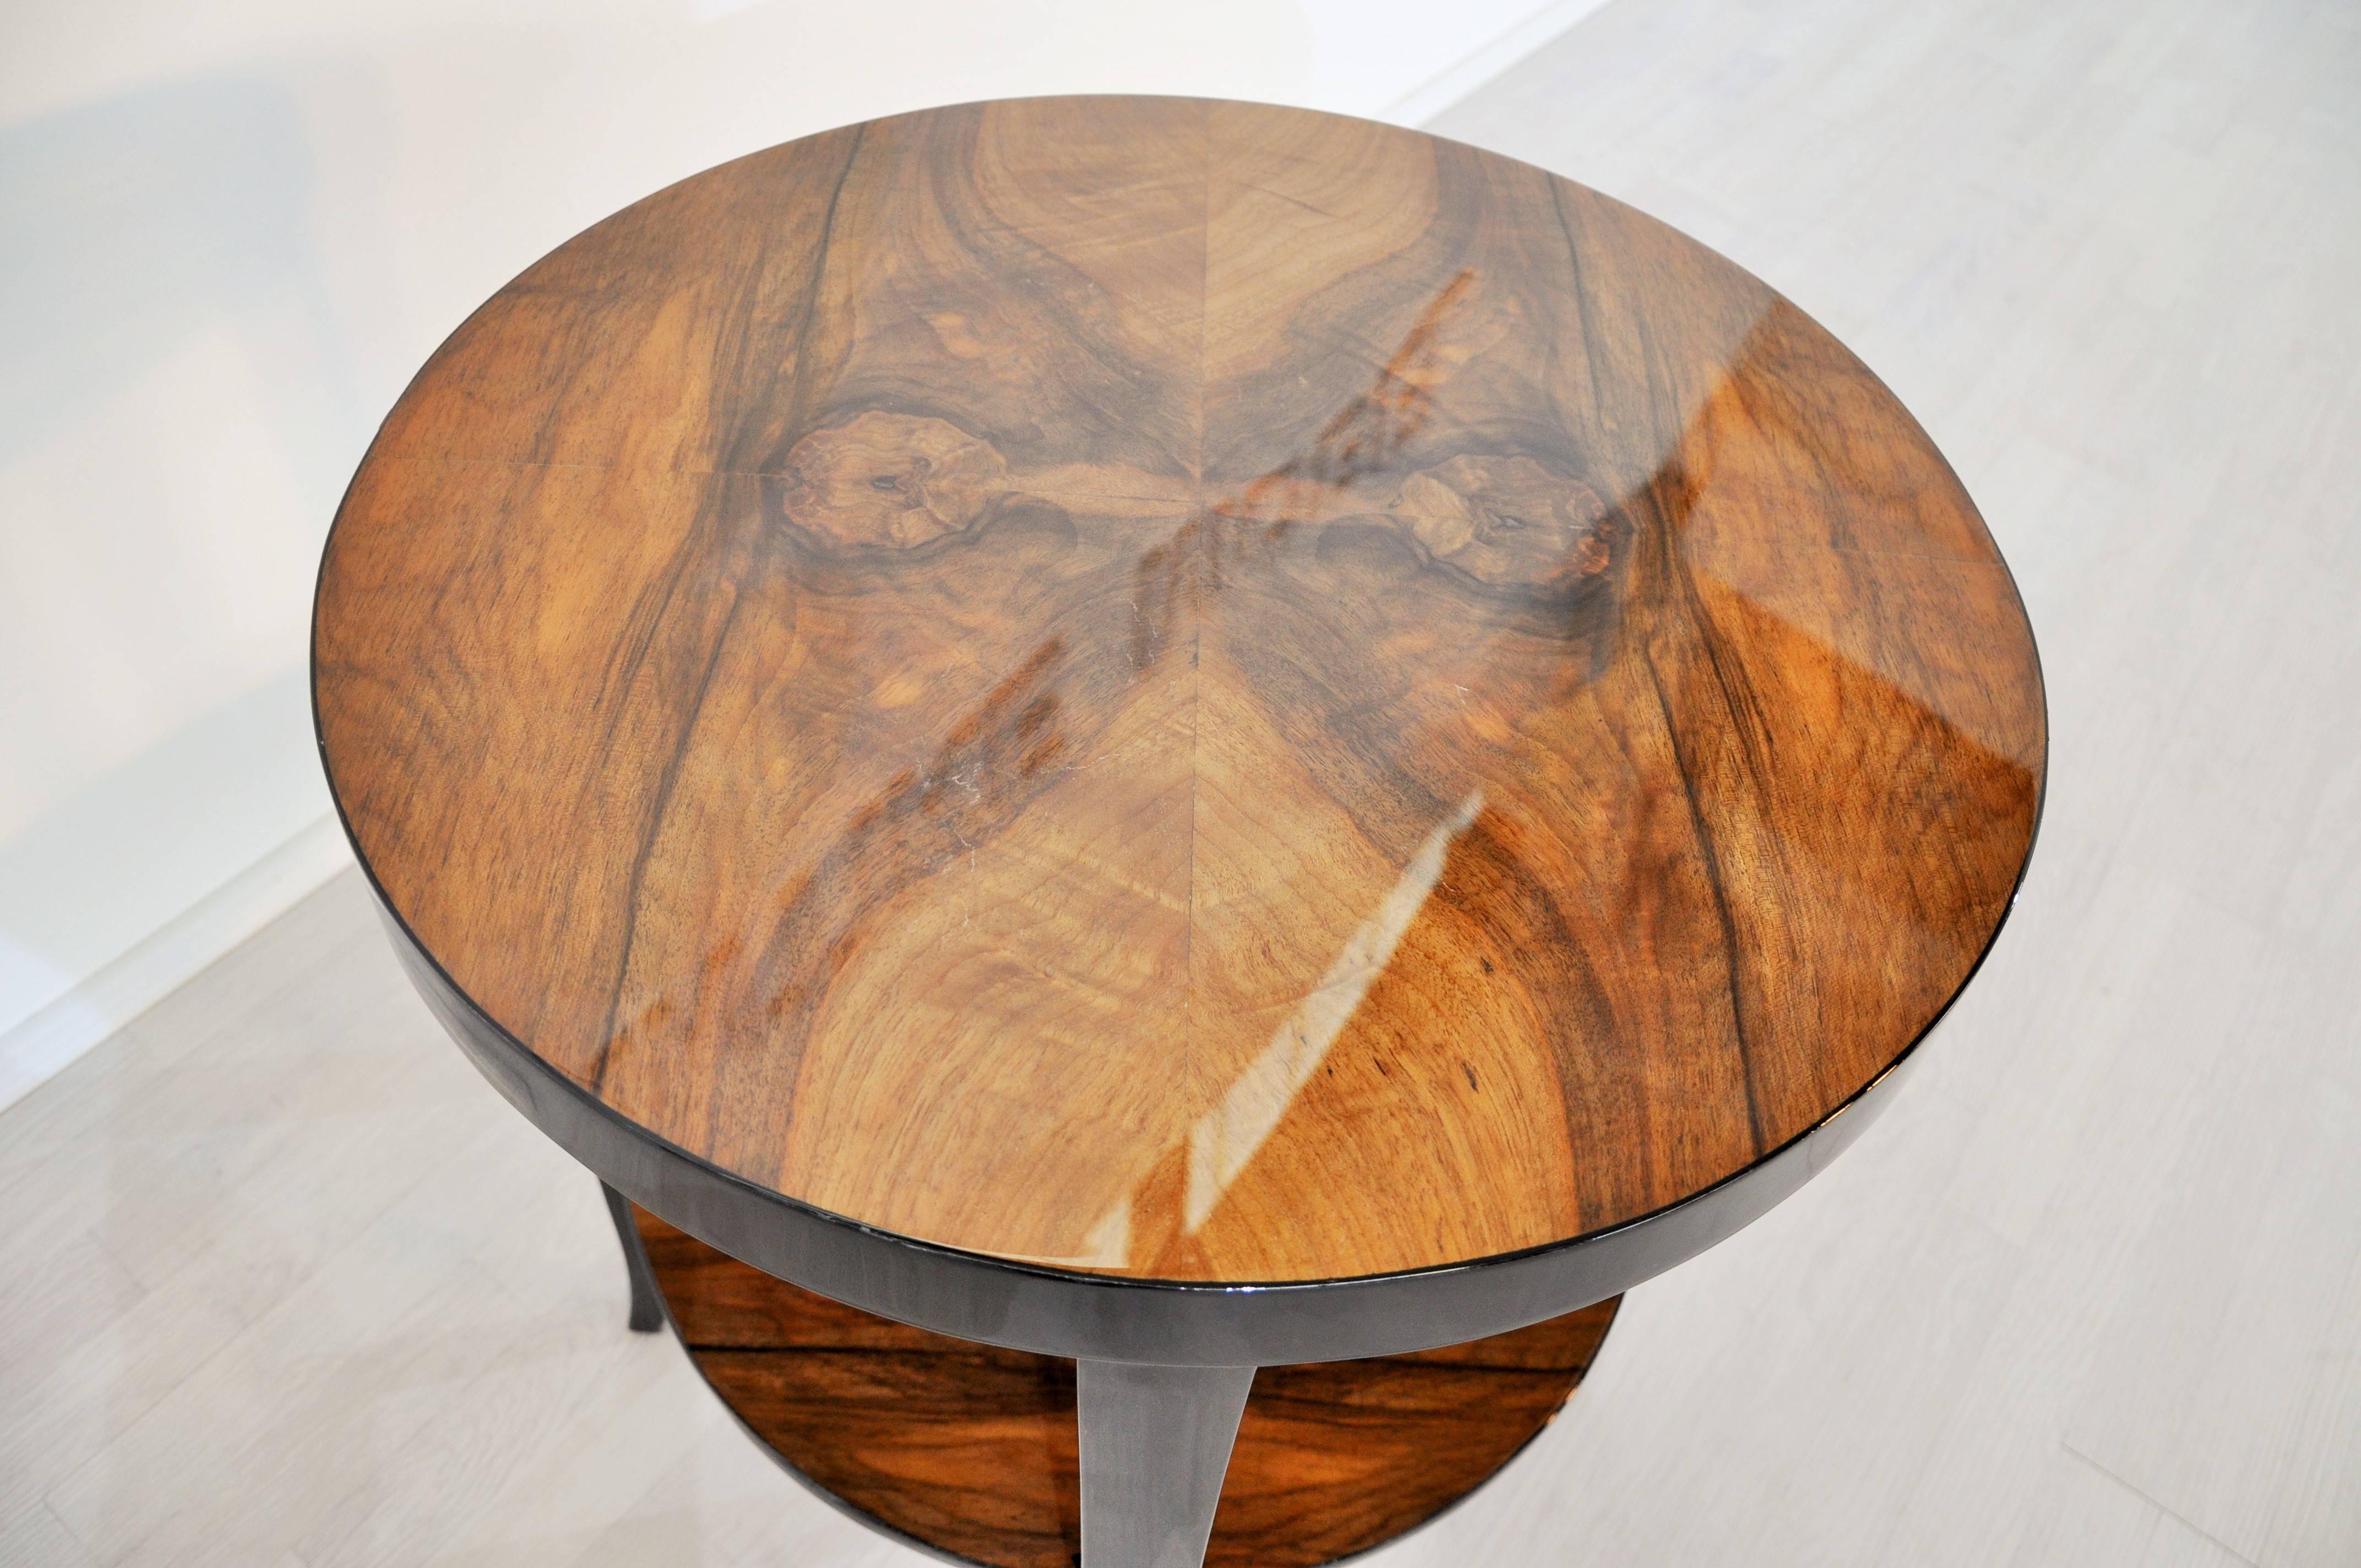 Wonderful Side table from the 1930s.

Legs with a multilayer piano lacquer
Tabletop made of walnut-wood with a stunning grain
Compact measurements, diameter of 56cm

An absolute stunning piece from a great furniture era.
We got our hands on